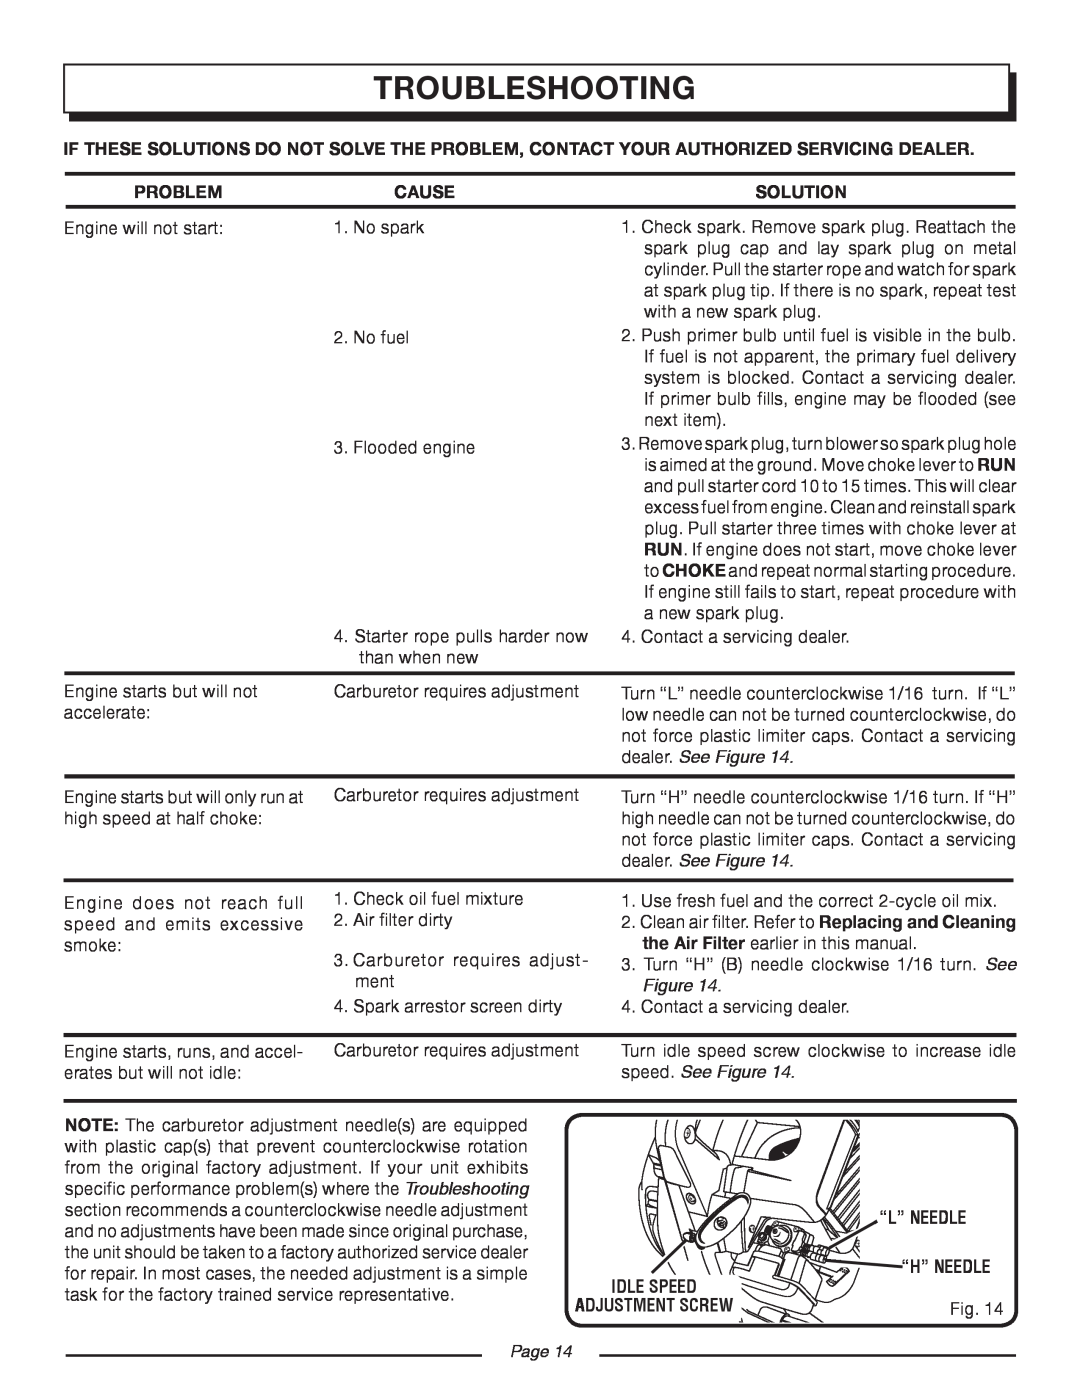 Homelite UT08934D manual Troubleshooting, Problem, Cause, Solution, dealer. See Figure, speed. See Figure, Page, “L” Needle 